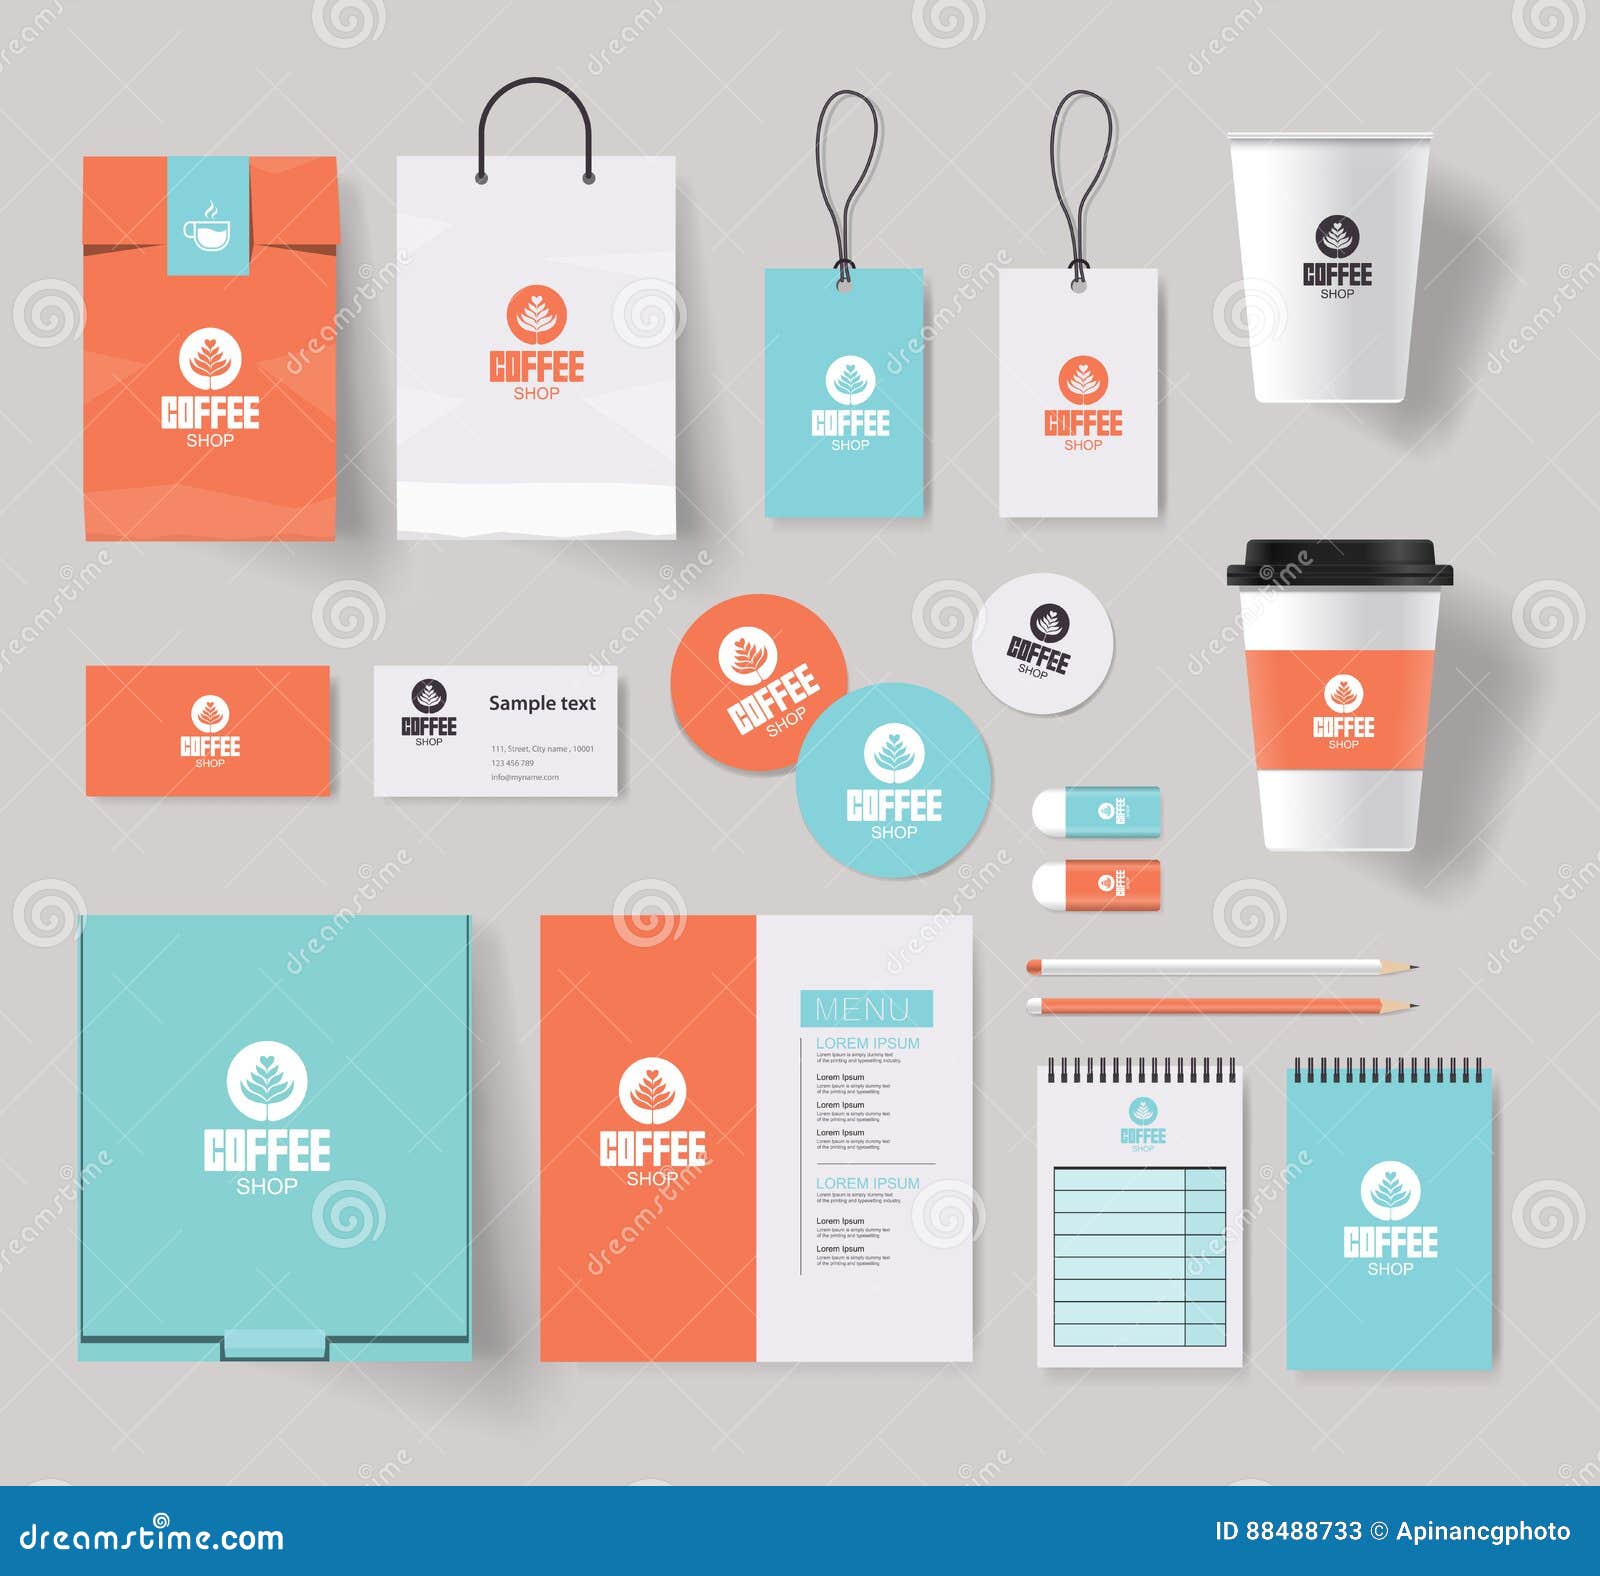 Download Corporate Branding Identity Mock Up Template For Coffee Shop Stock Vector - Illustration of logo ...